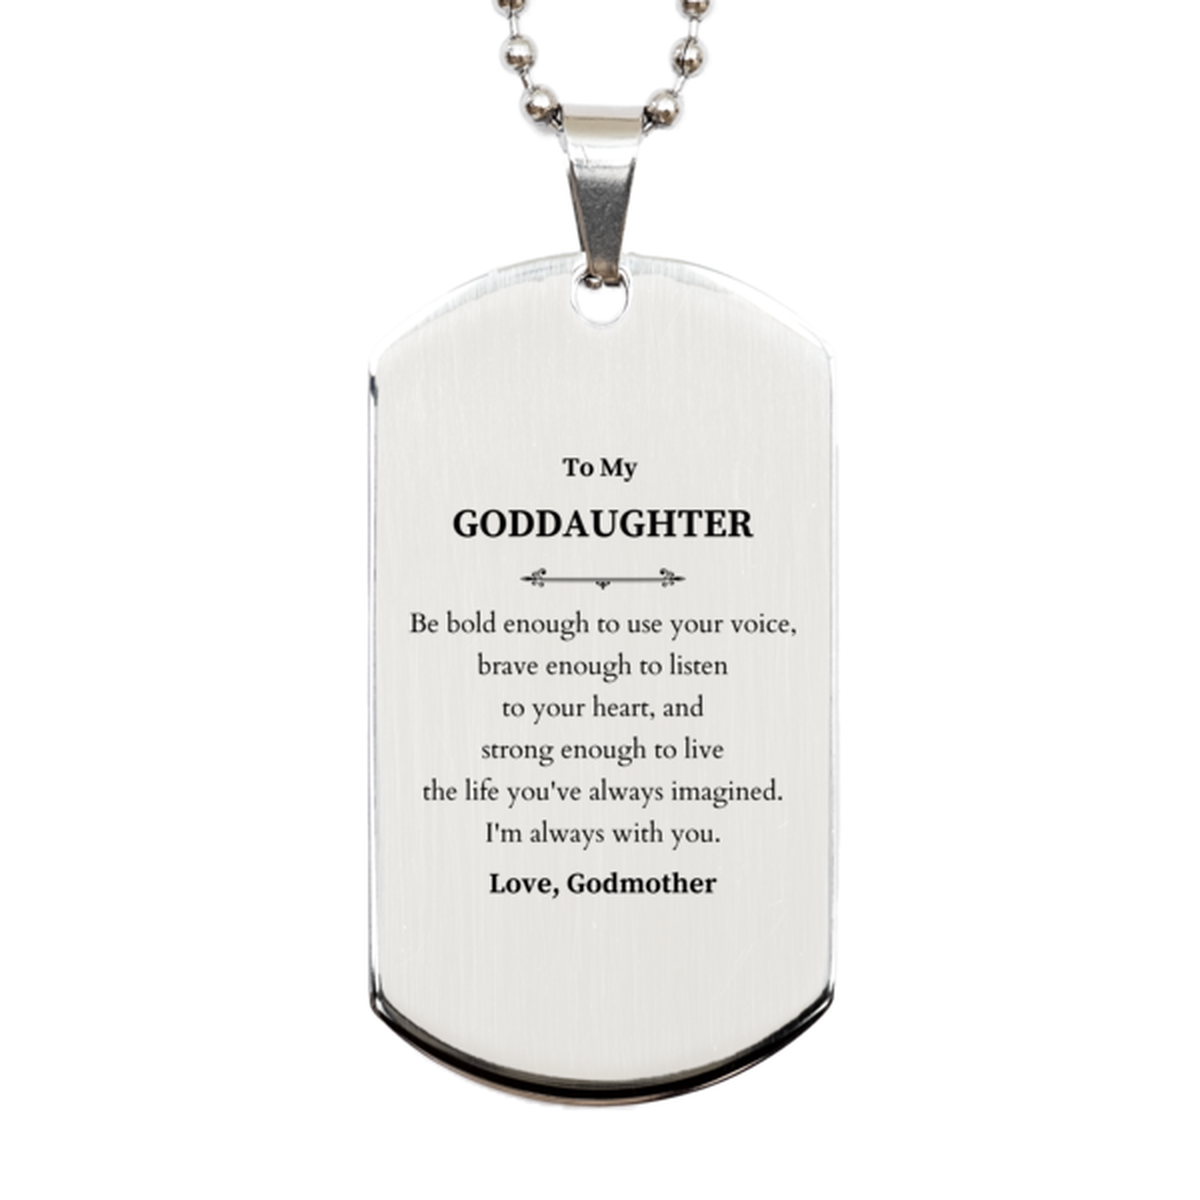 Keepsake Goddaughter Silver Dog Tag Gift Idea Graduation Christmas Birthday Goddaughter from Godmother, Goddaughter Be bold enough to use your voice, brave enough to listen to your heart. Love, Godmother